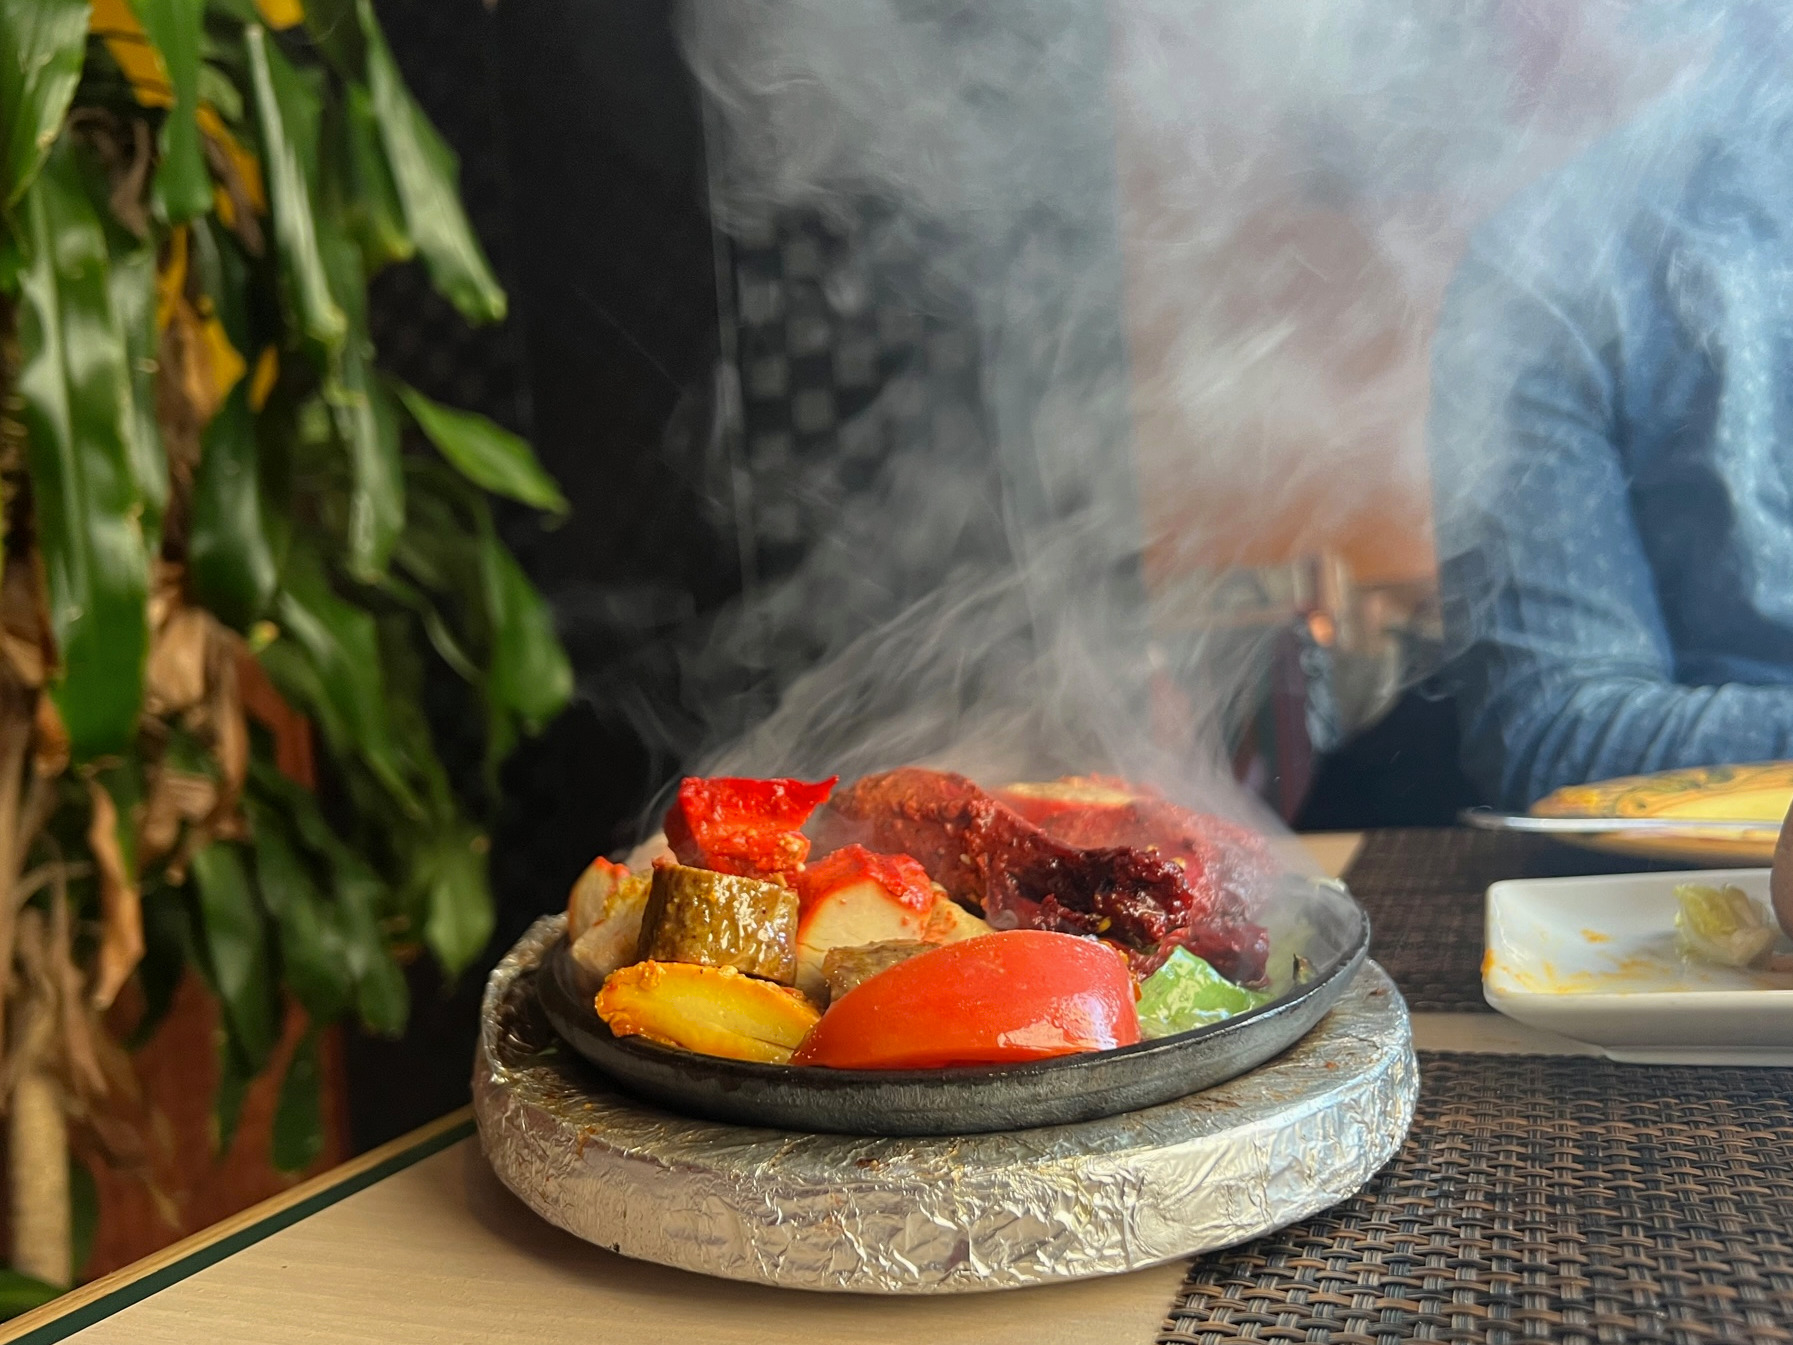 A sizzling skillet of Indian meats has a plume of smoke and brightly colored meats. Photo by Alyssa Buckley.